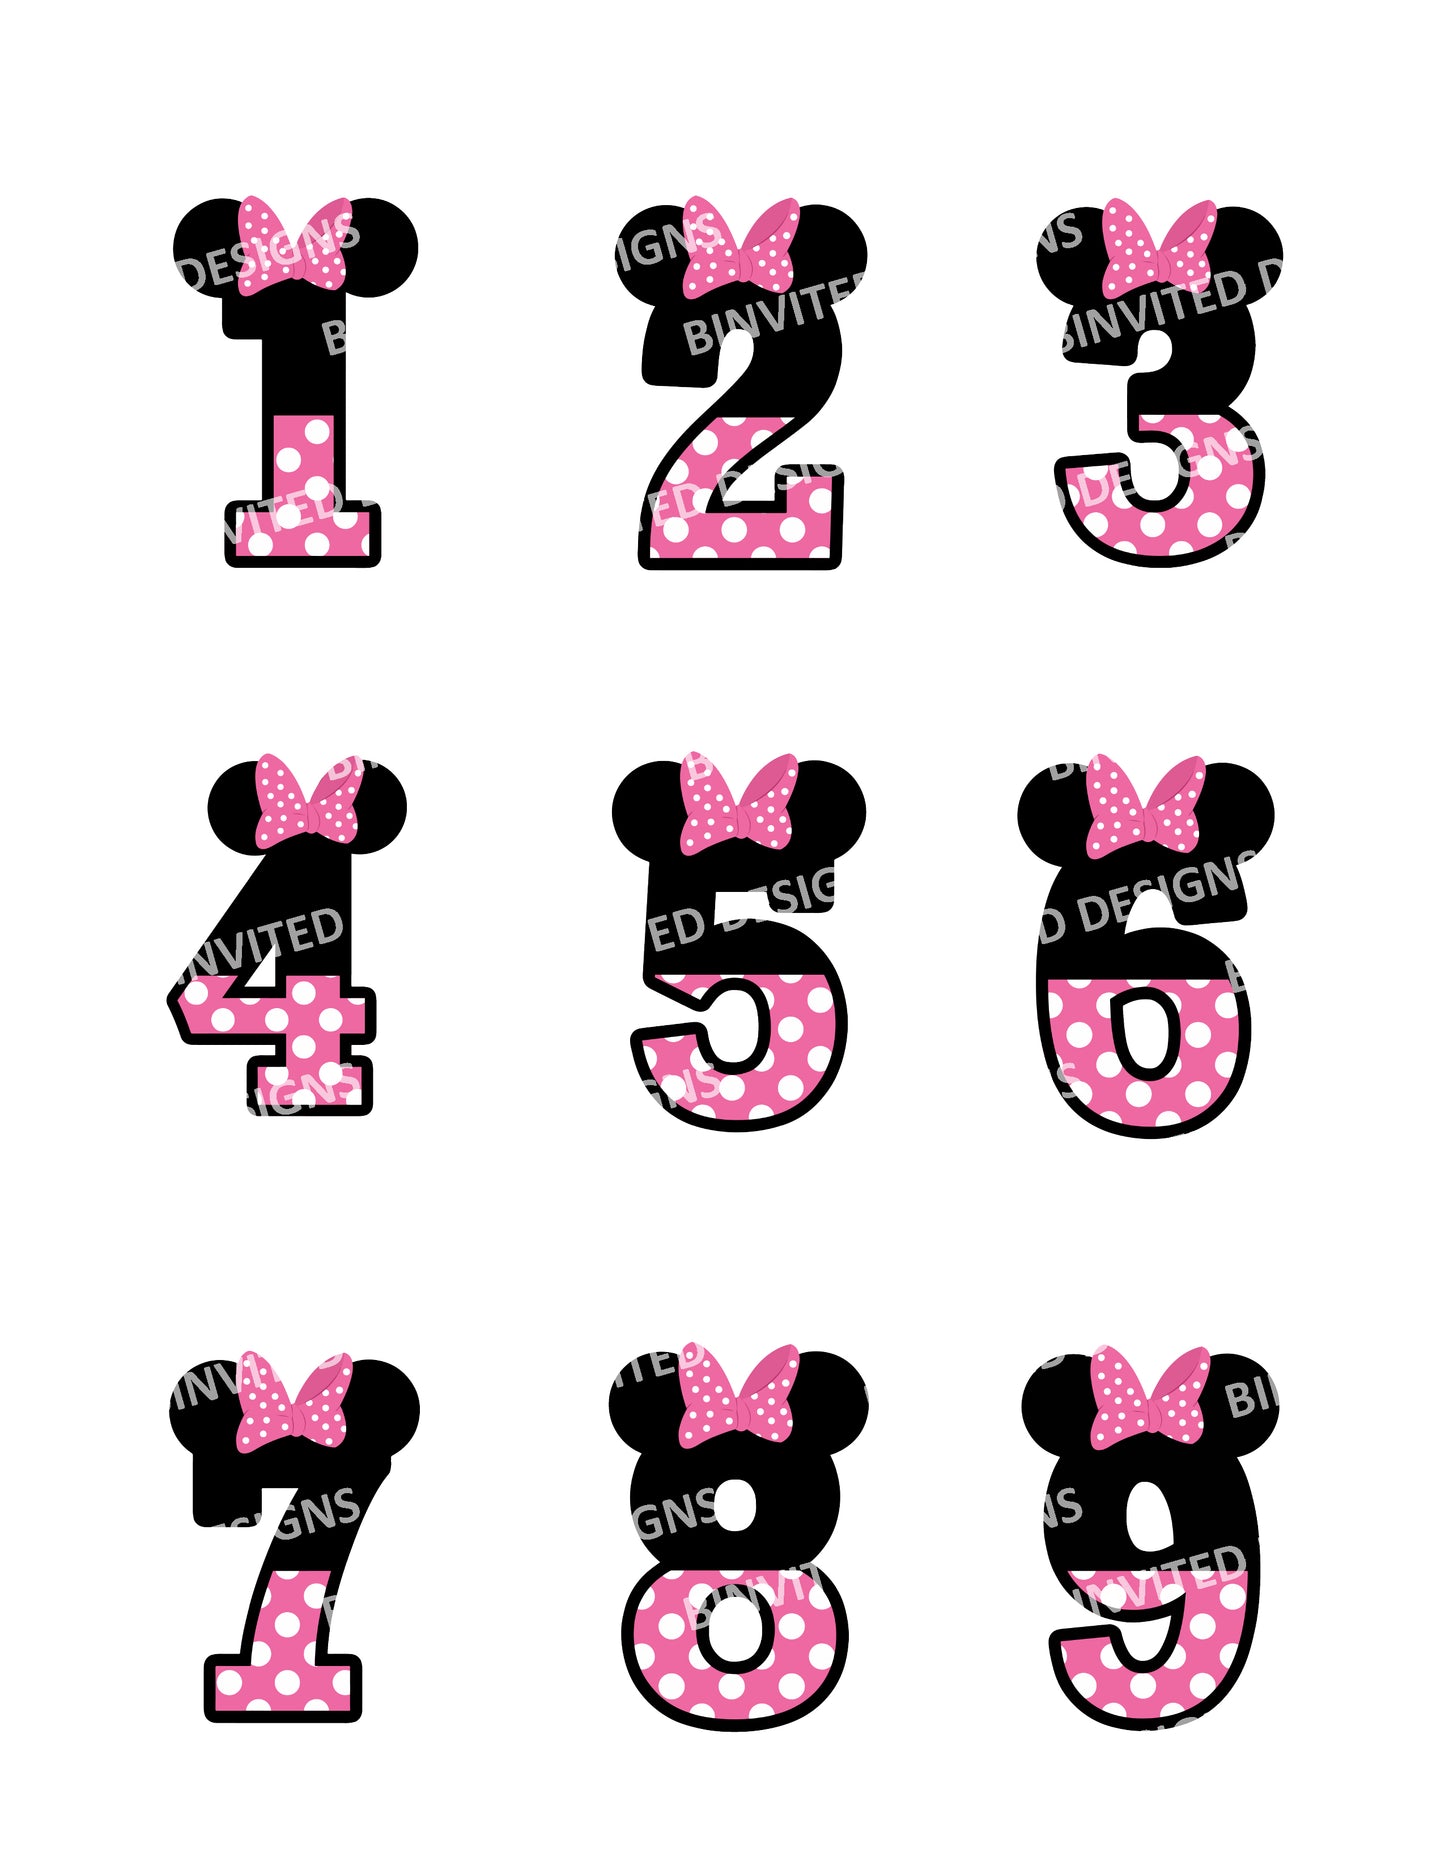 MICKEY & MINNIE MOUSE Pink or Red Personalized Stickers for Gift Bags, Party Favors! Printed or Digital!